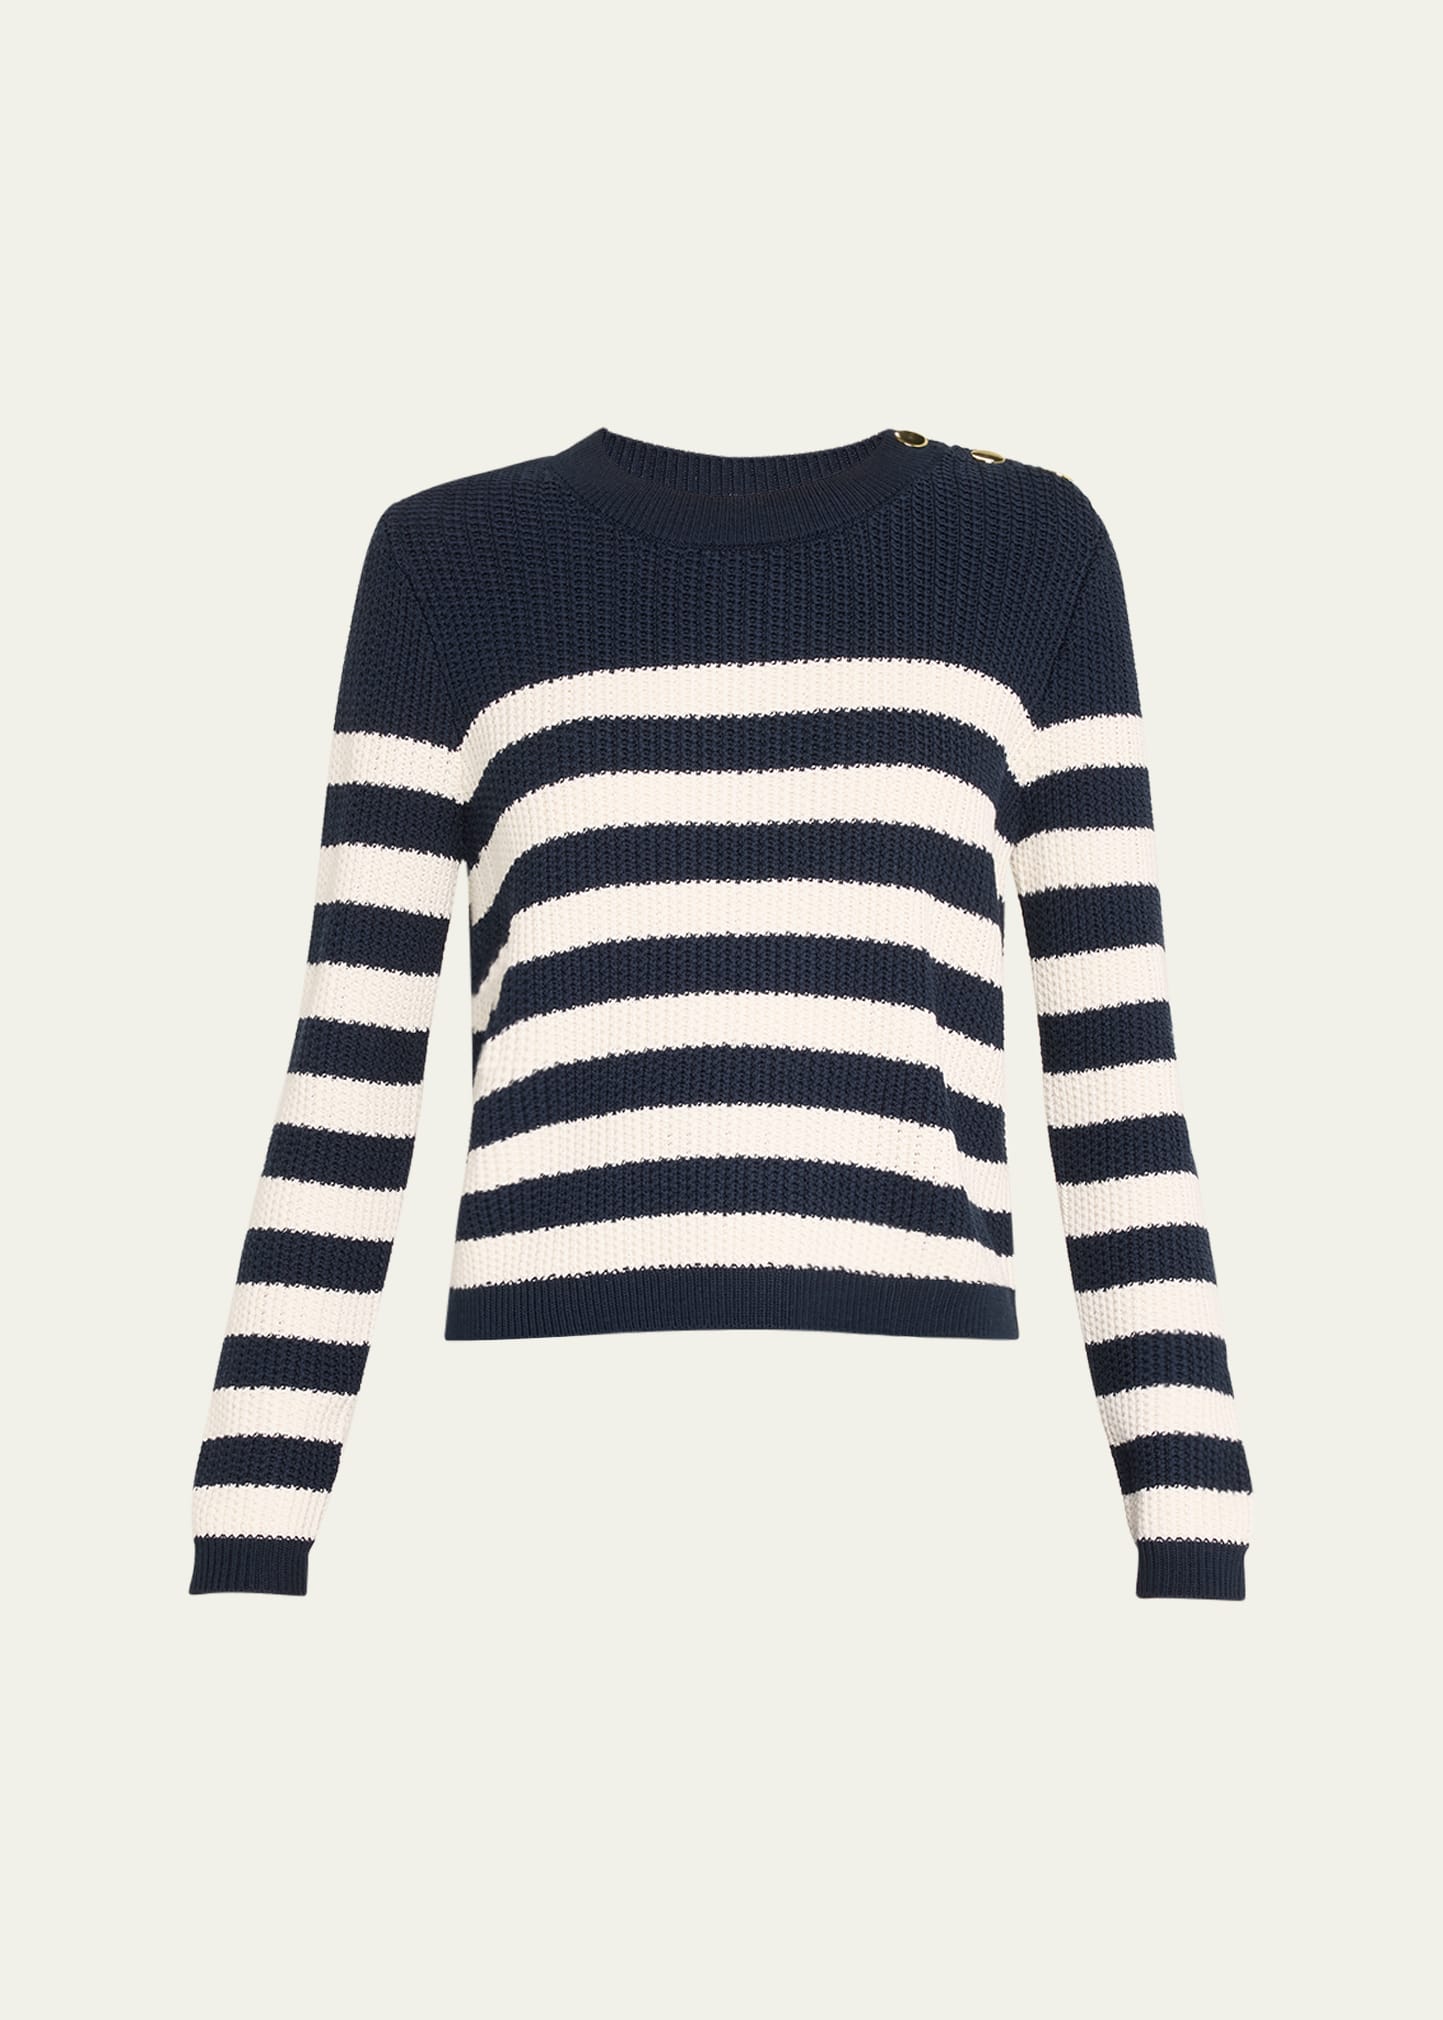 Striped Crewneck Sweater with Buttons